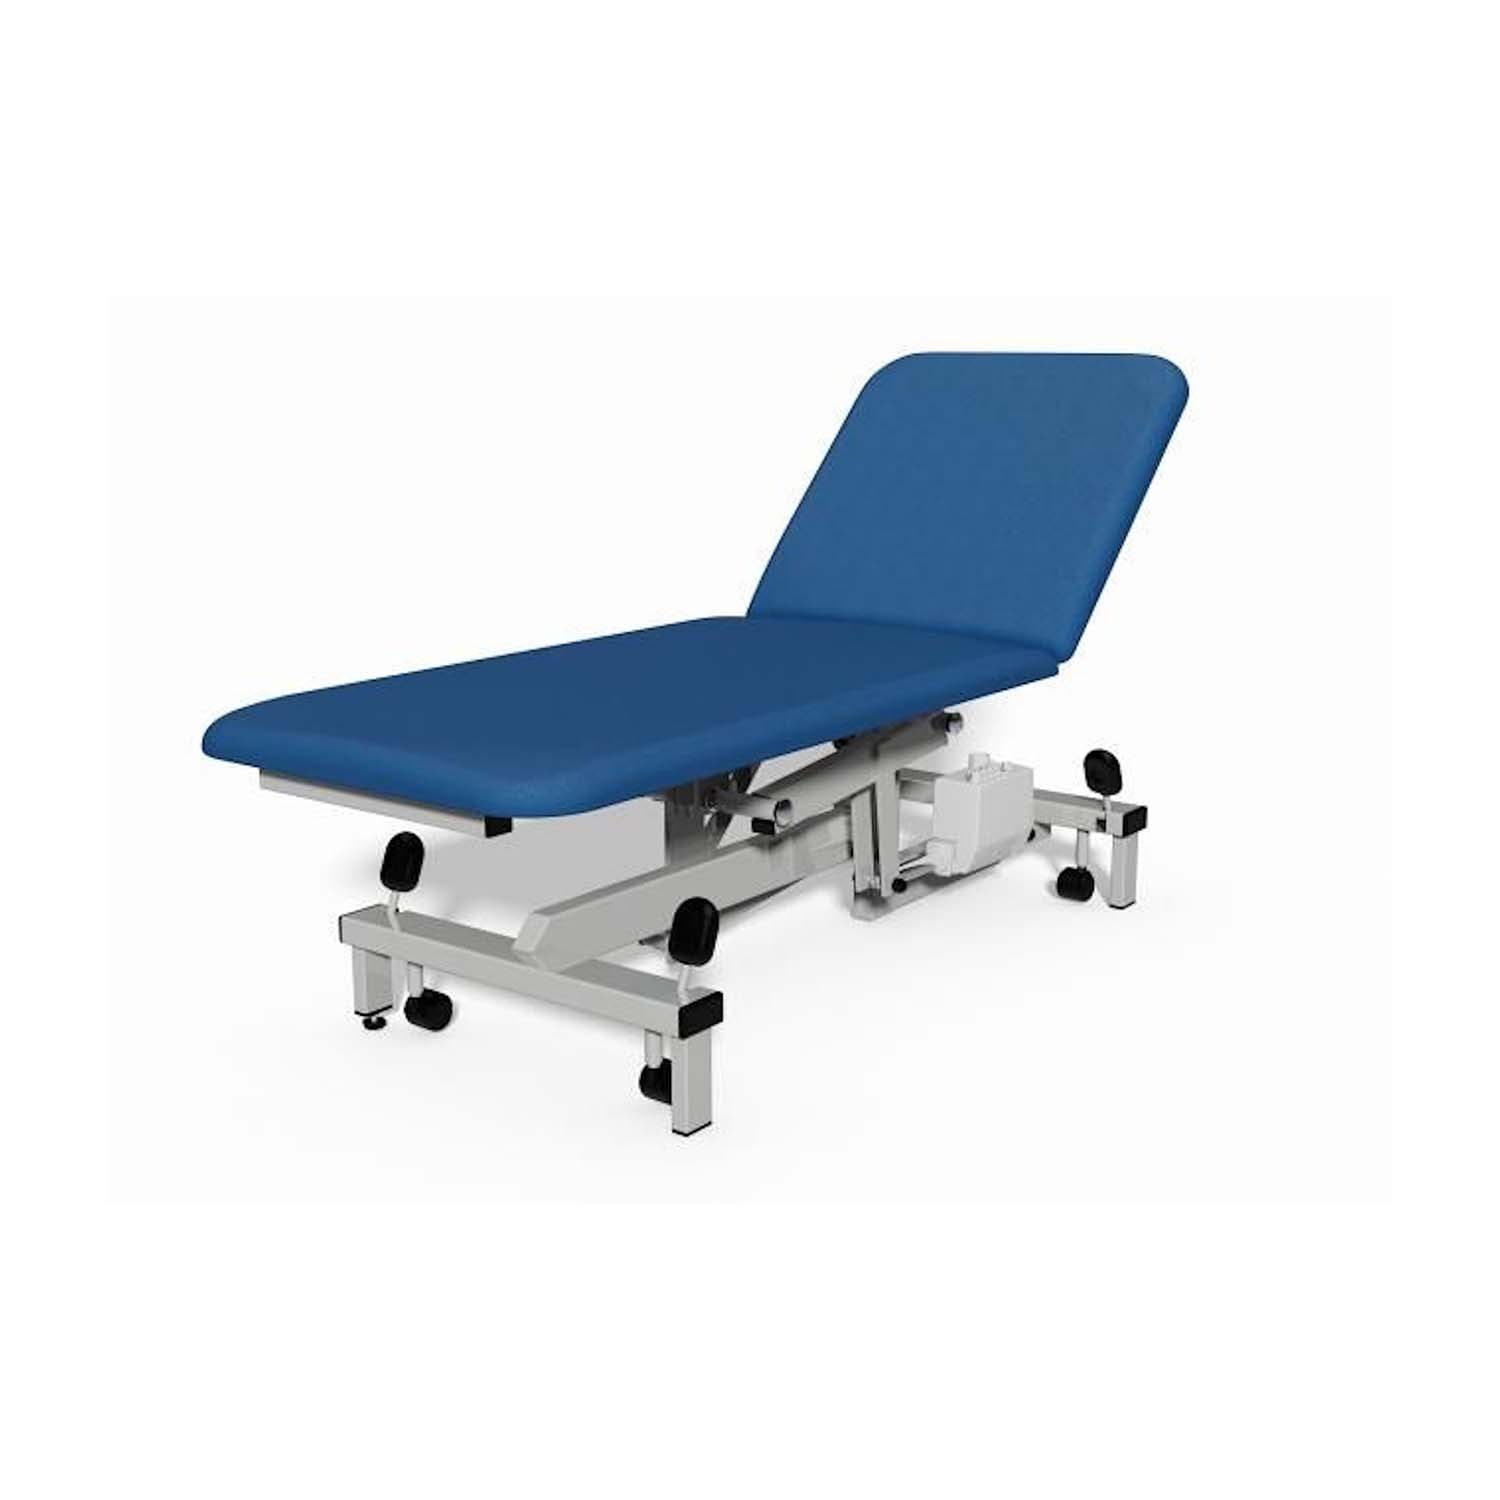 Plinth 2000 Model 502 Examination Couch | Hydraulic | Lupin